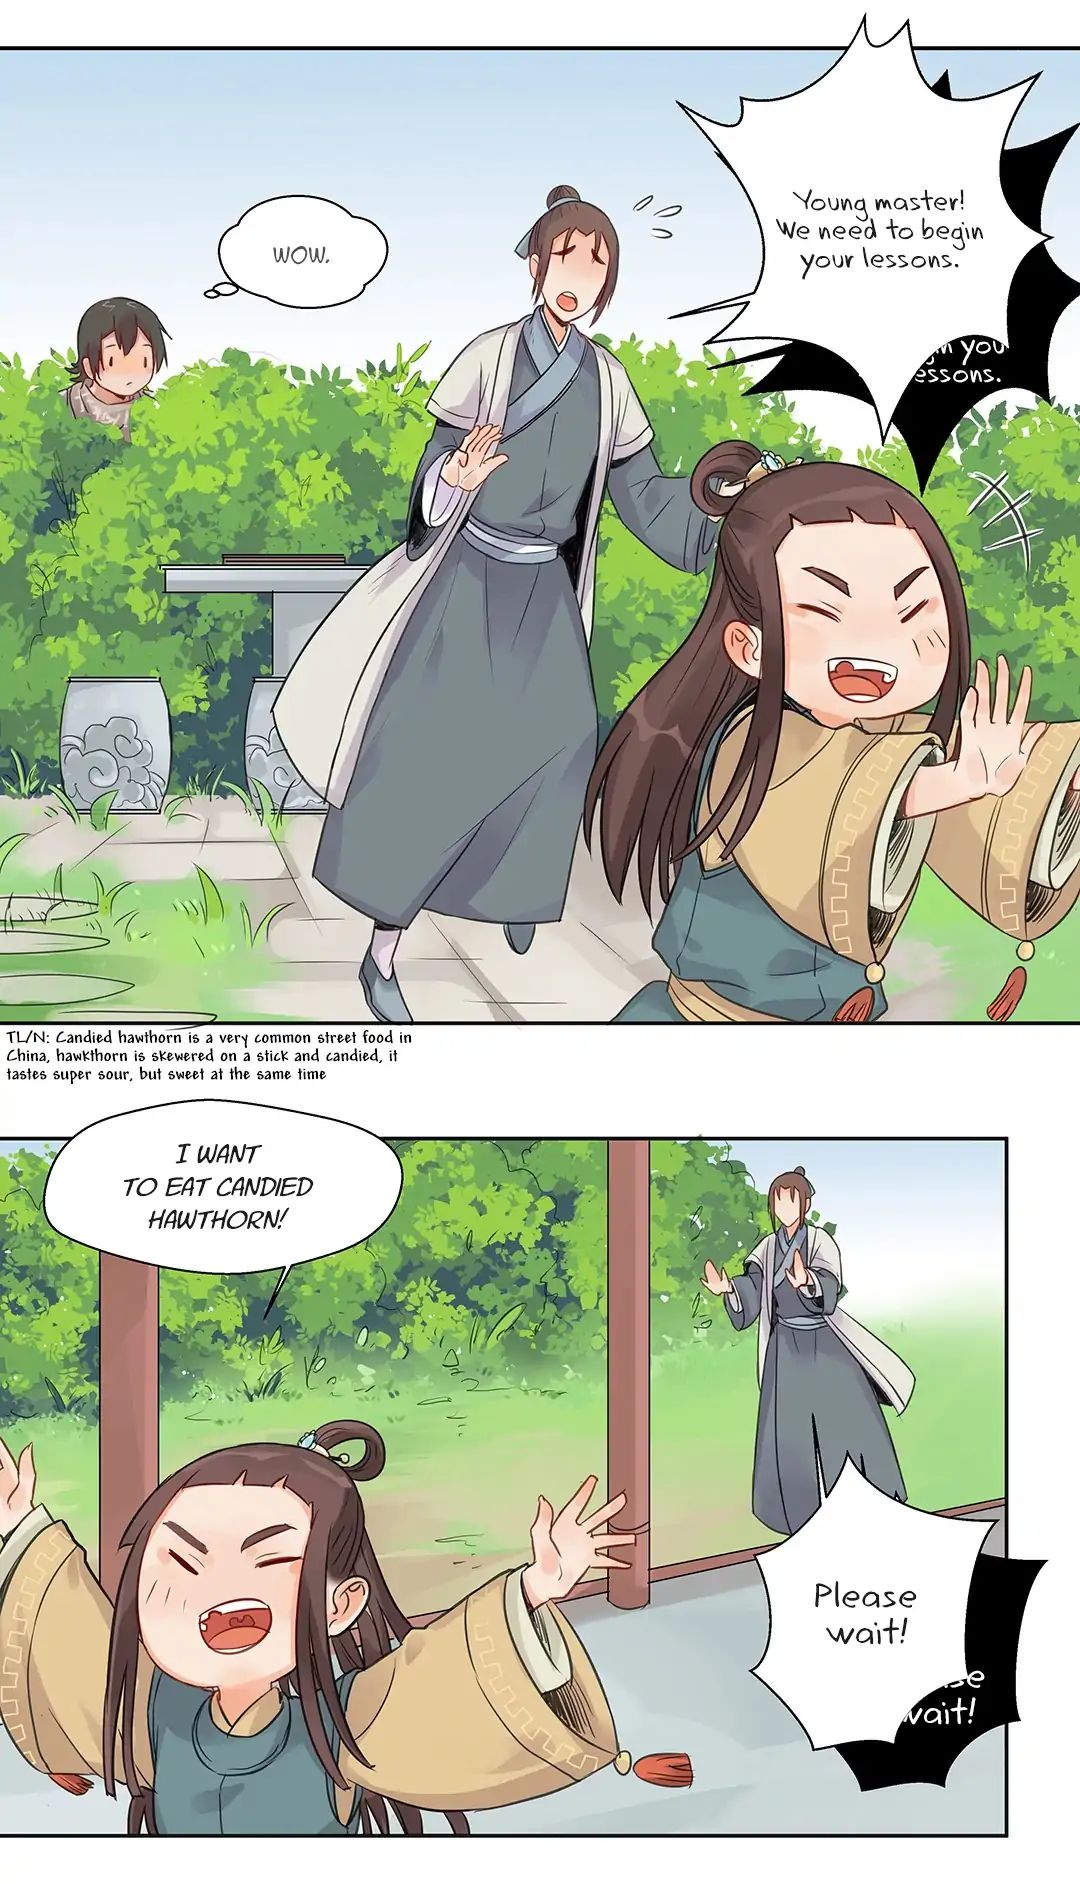 A Gust Of Wind Blows At Daybreak Chapter 2 Page 7